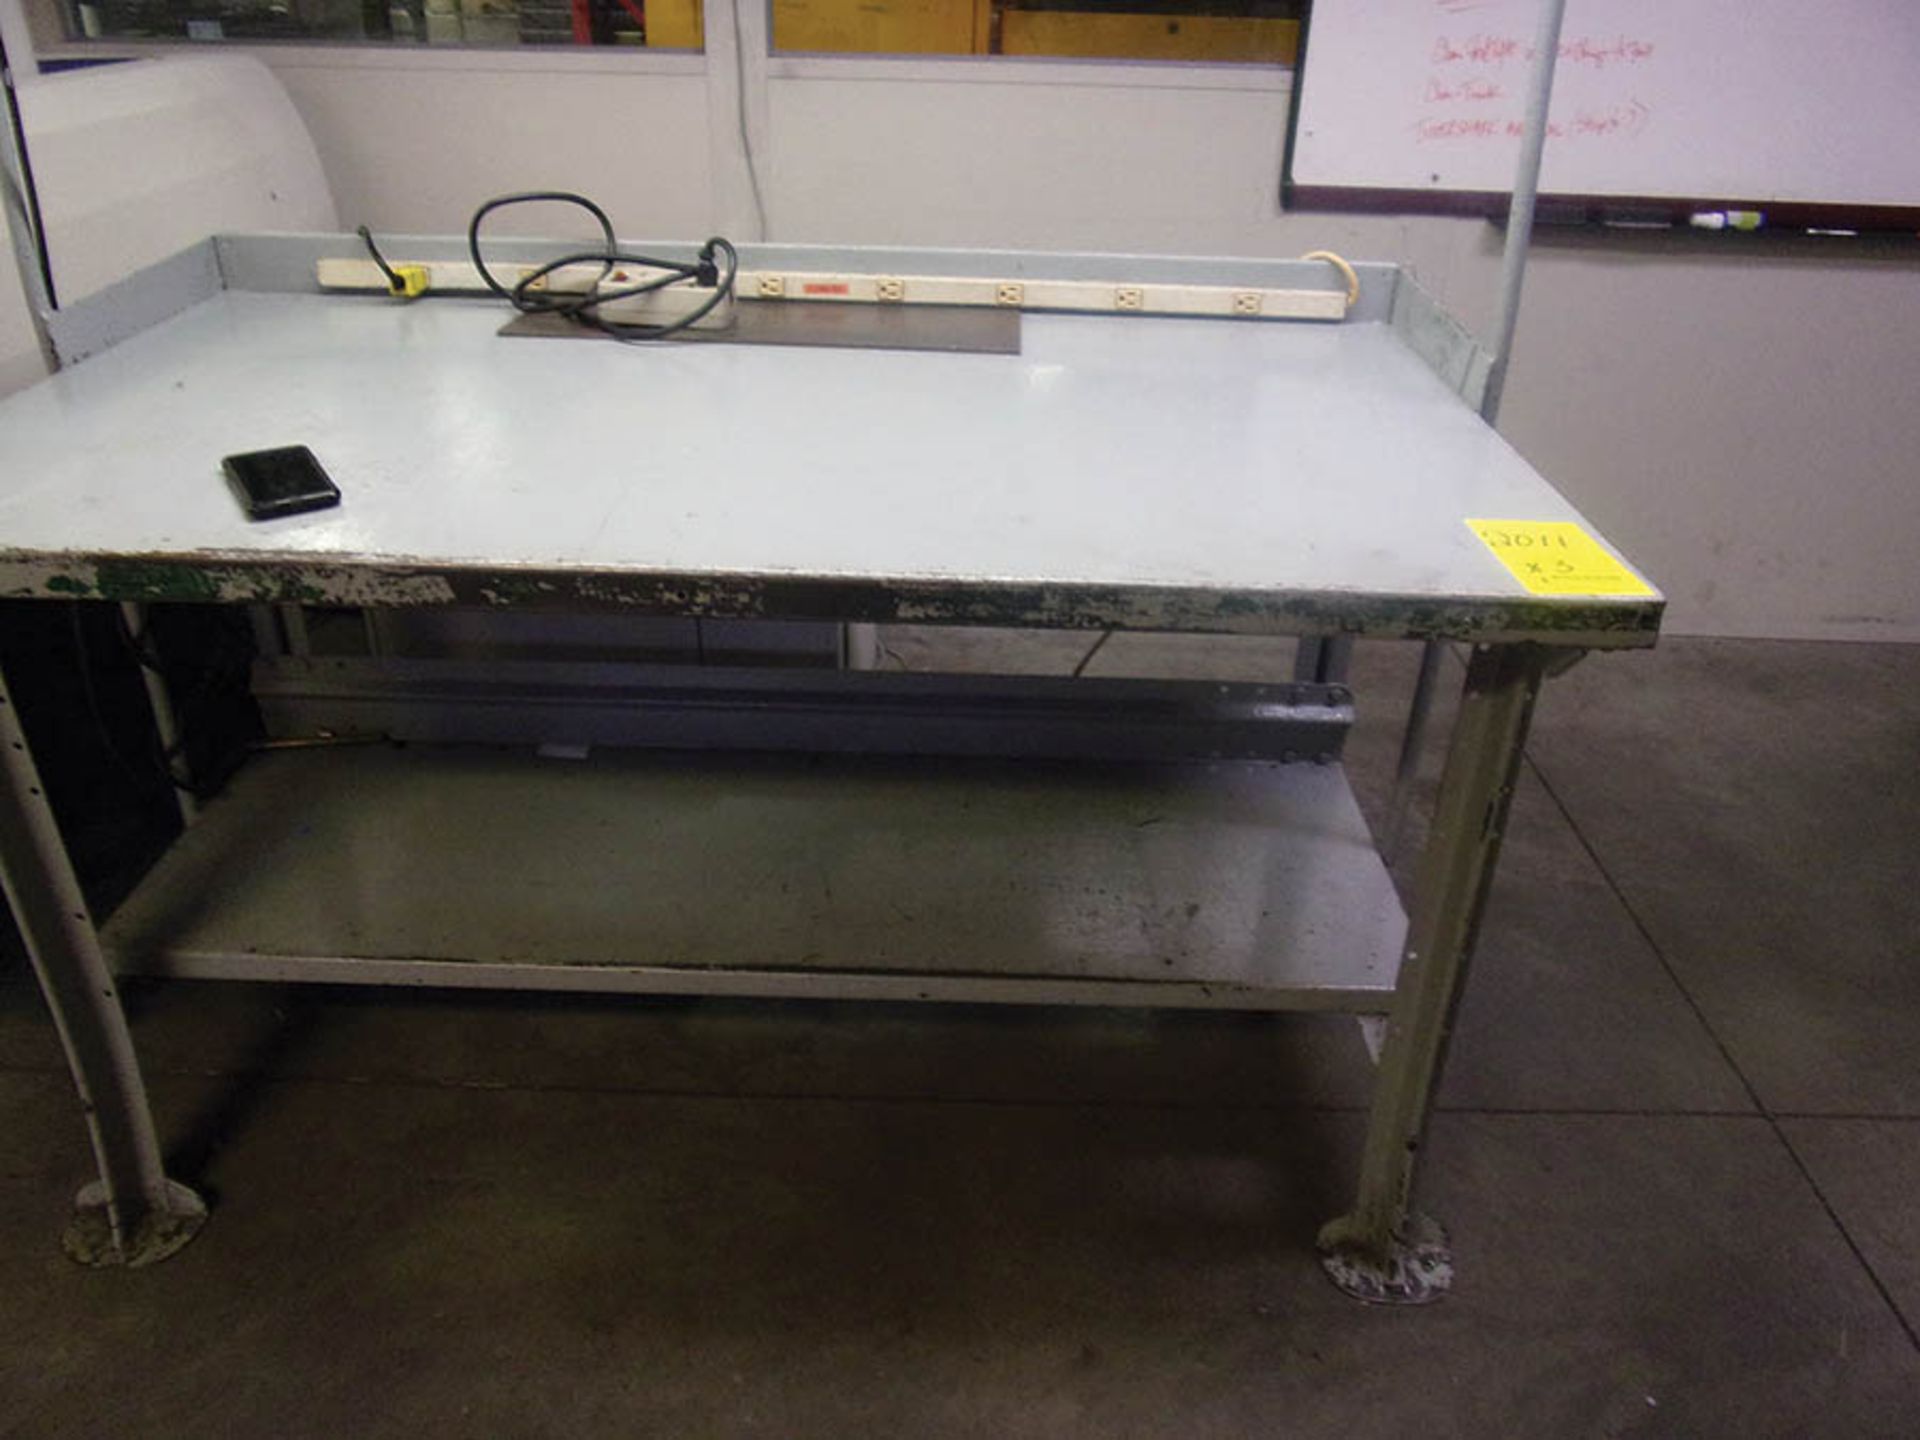 (3) METAL WORKBENCHES, (1) W/ OVERHEAD LIGHT, POWER STRIP - Image 2 of 3